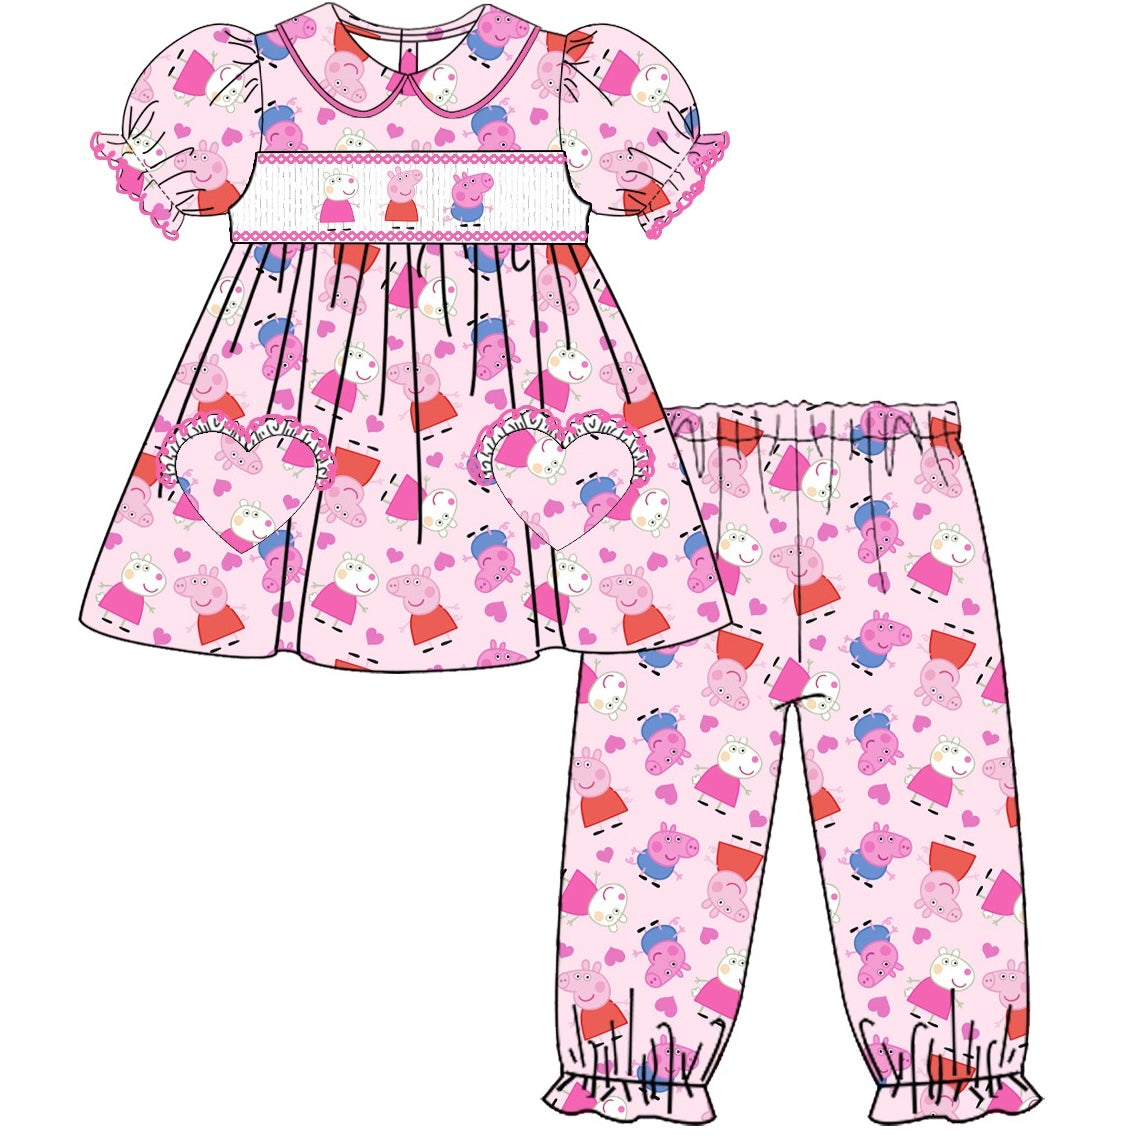 Exclusive Peppa Pig Smocked Pyjama Set With Hair Bow (Pre Order 1-2 Weeks Wait For Delivery)